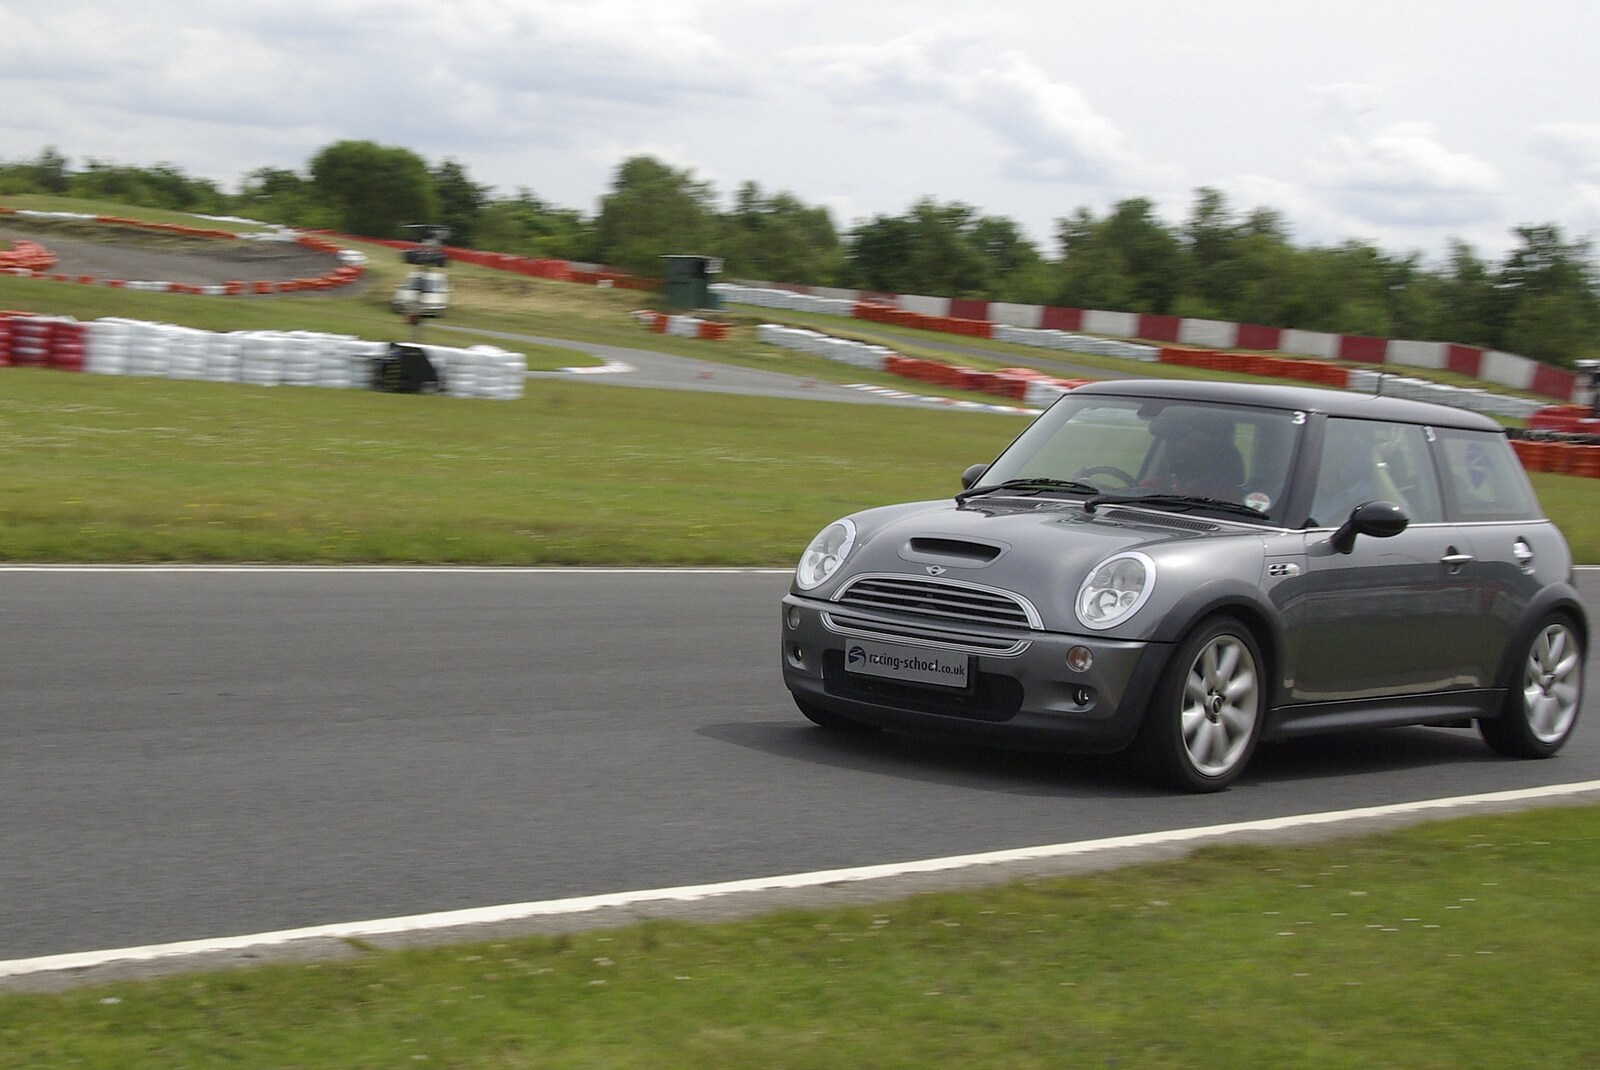 Driving a Racing Car, Three Sisters Racetrack, Wigan, Lancashire - 24th June 2008: Speeding round in a Cooper S